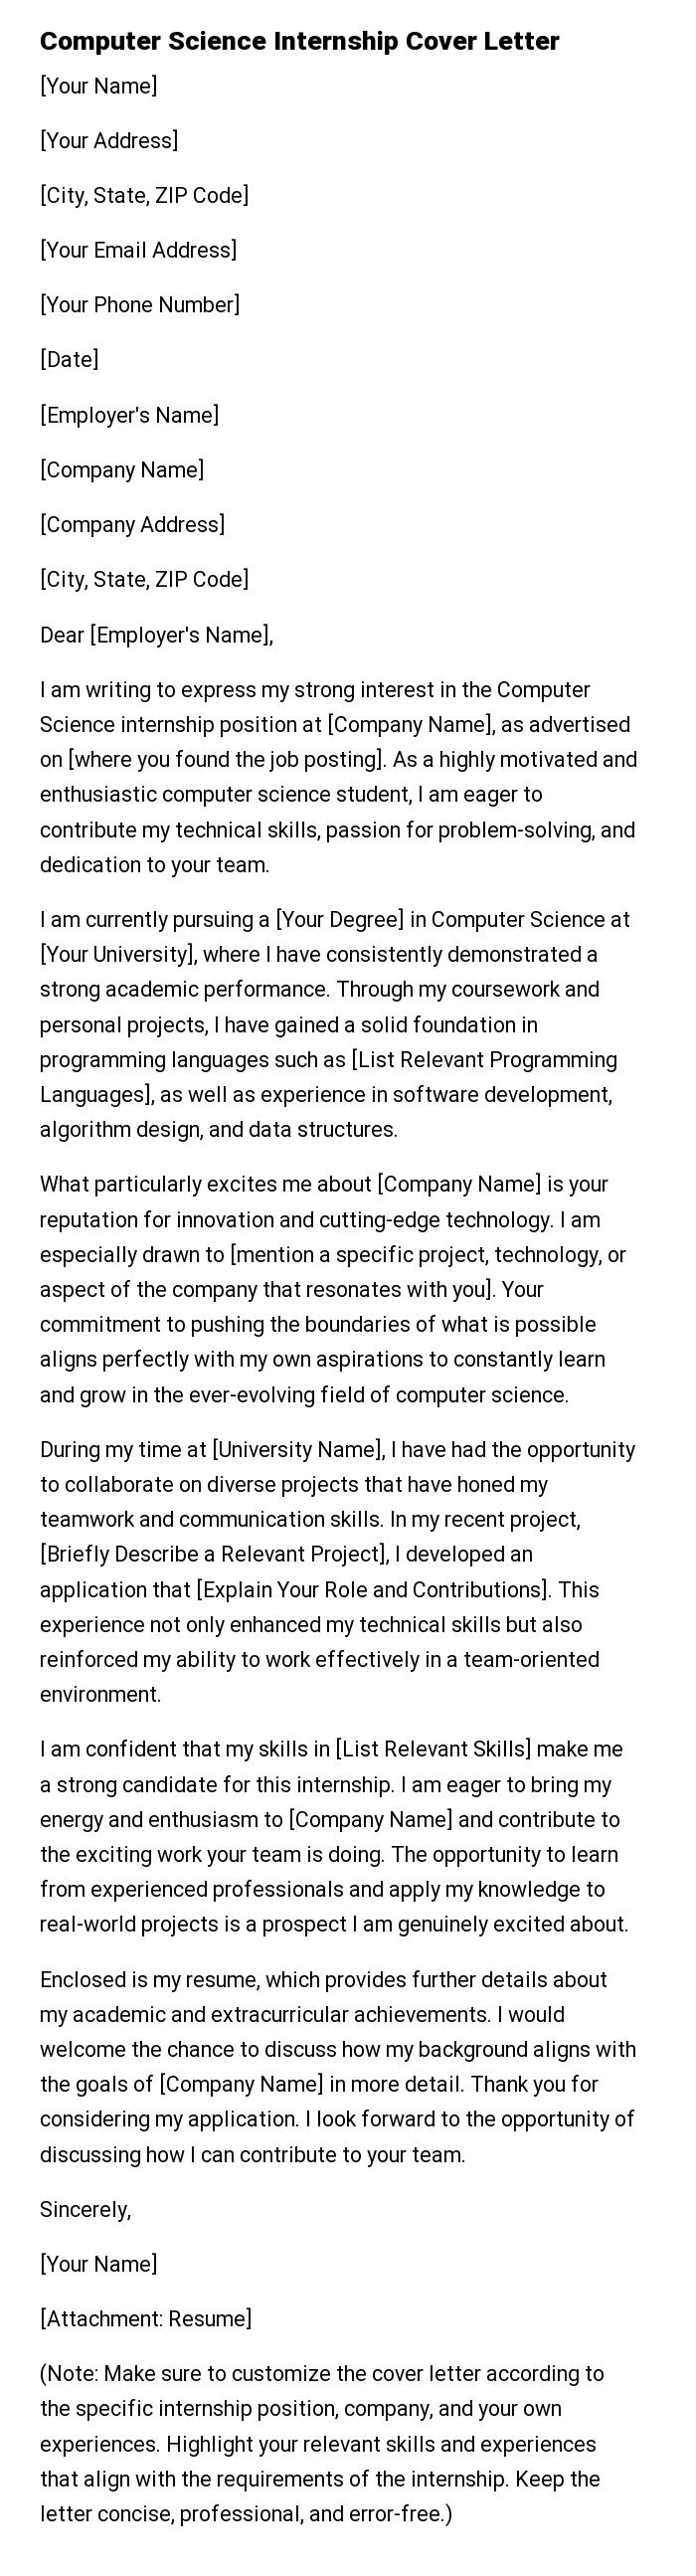 Computer Science Internship Cover Letter